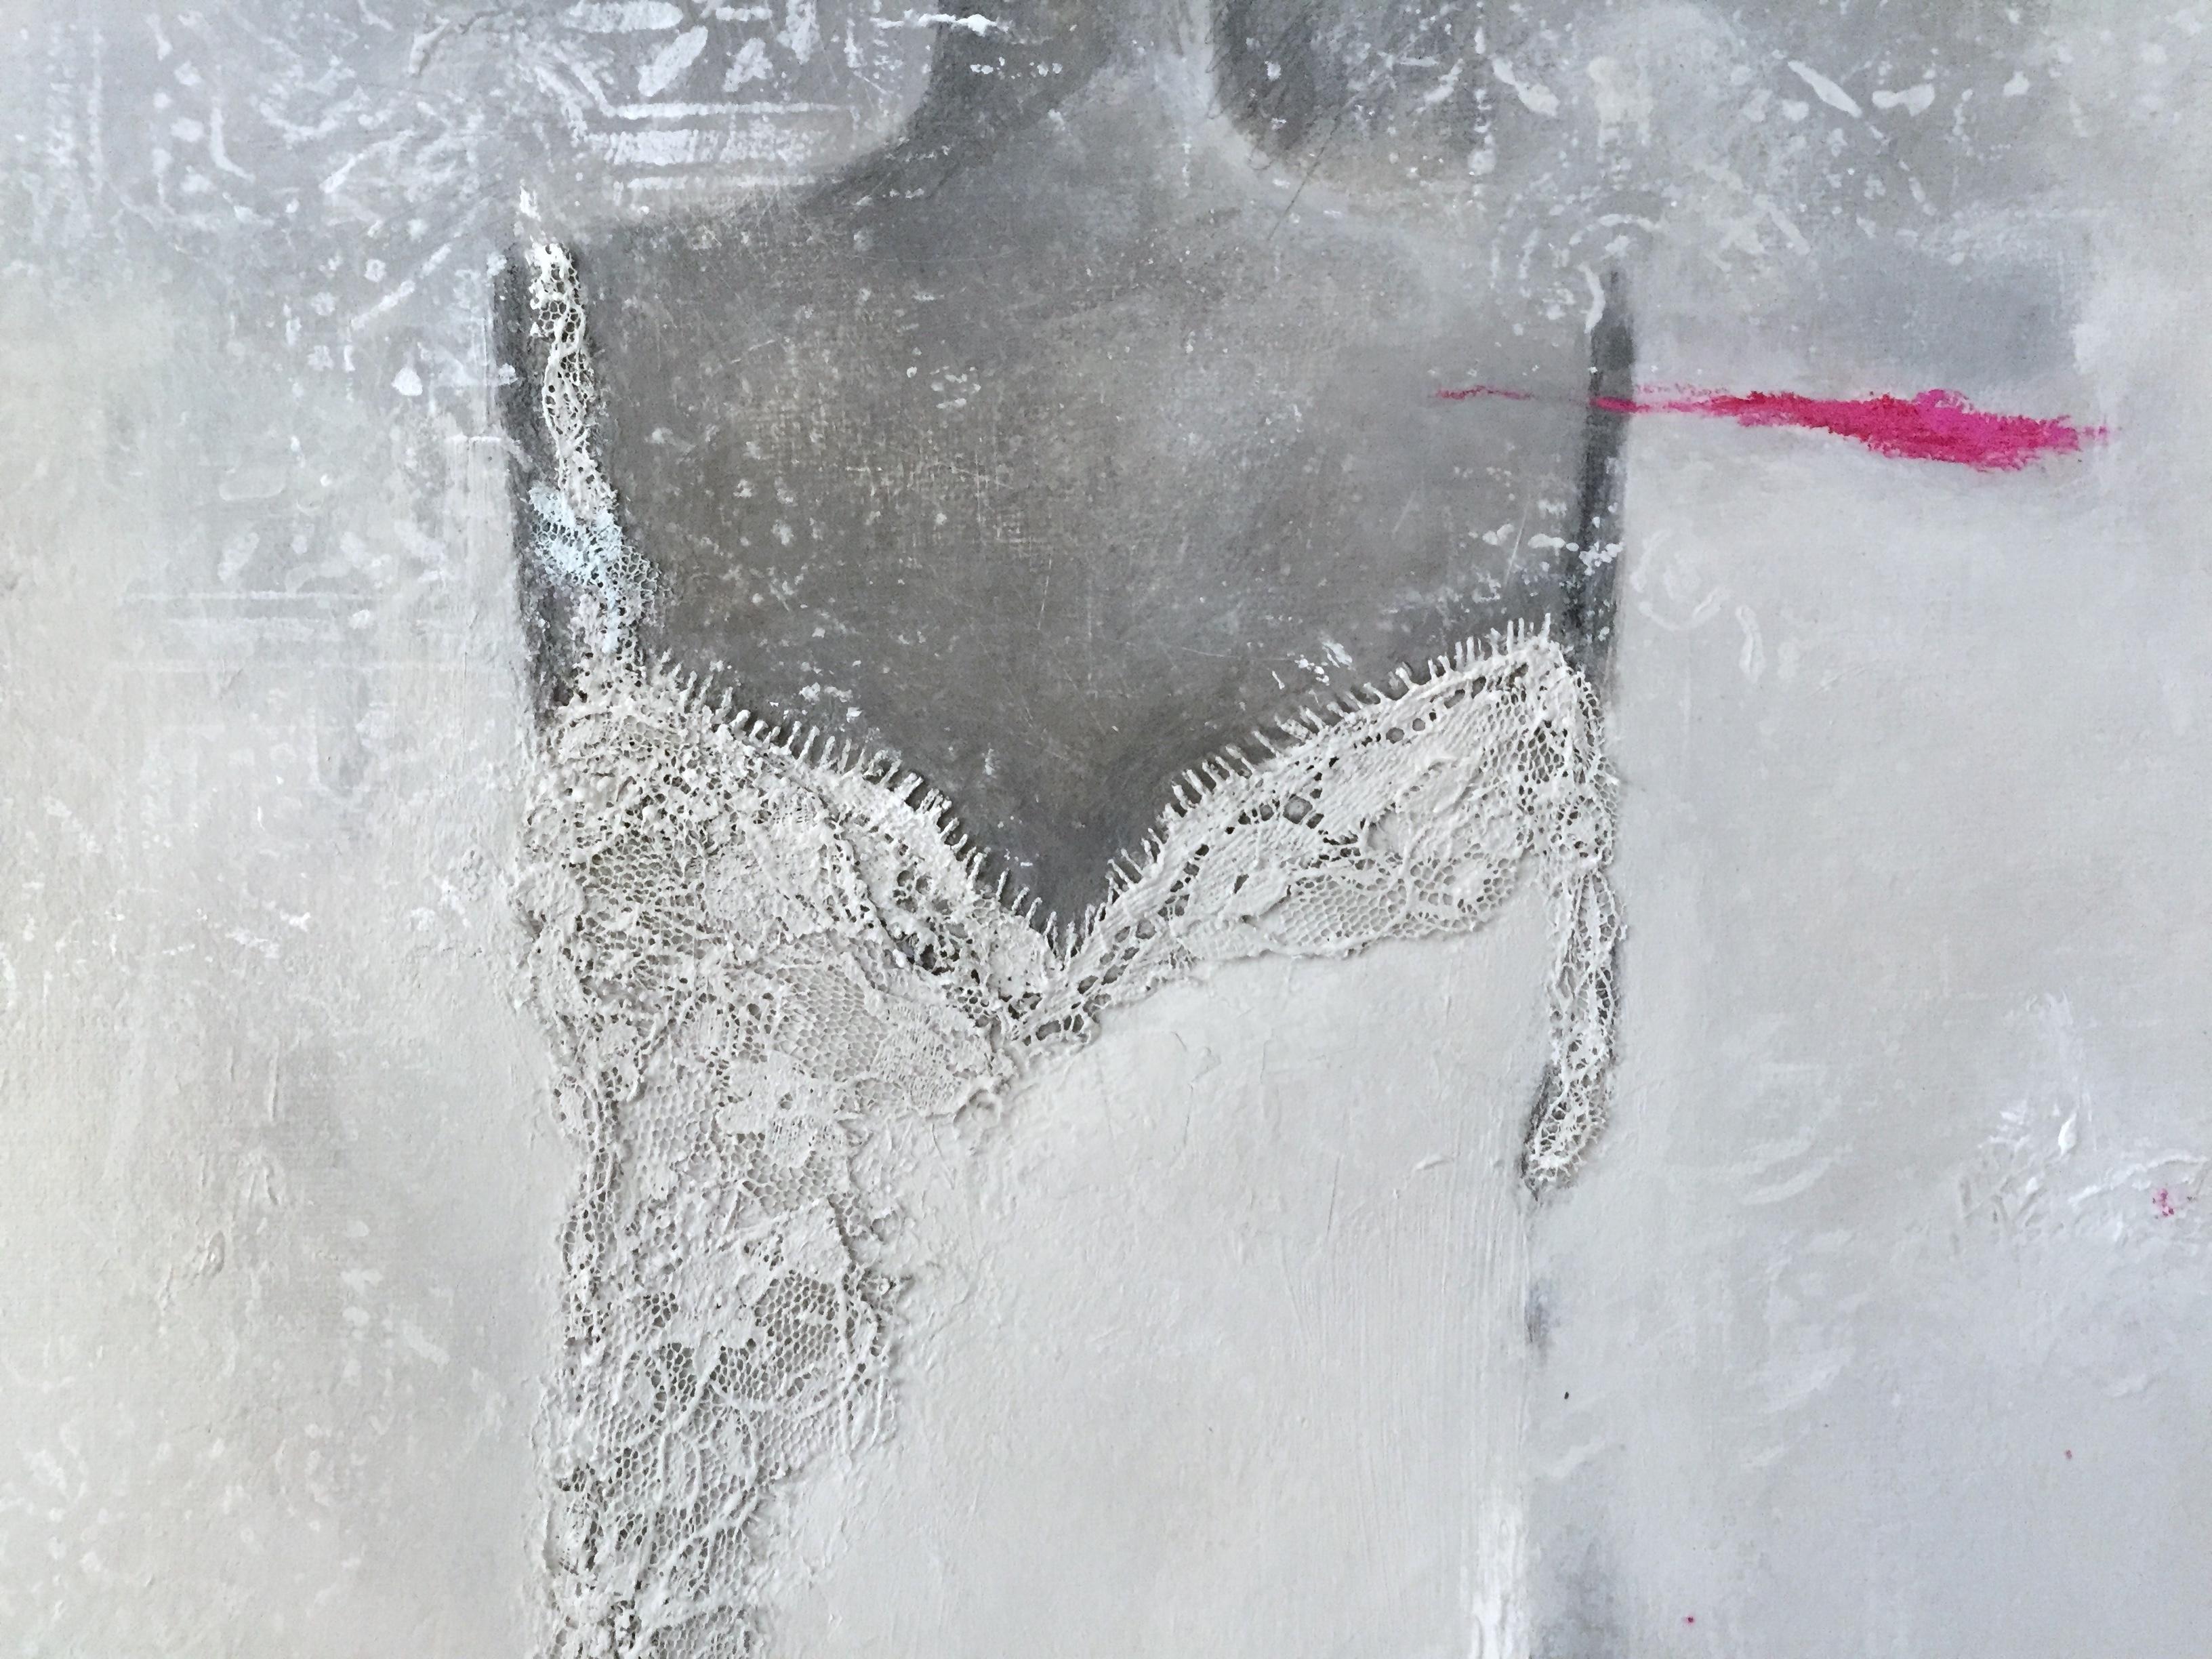 This delicate slip dress painting features an interplay of paint and textile with an outcome both expressive and refined. The combination of intricate detail and intuitive mark-making communicates a feminine, ethereal impression. Textured vintage